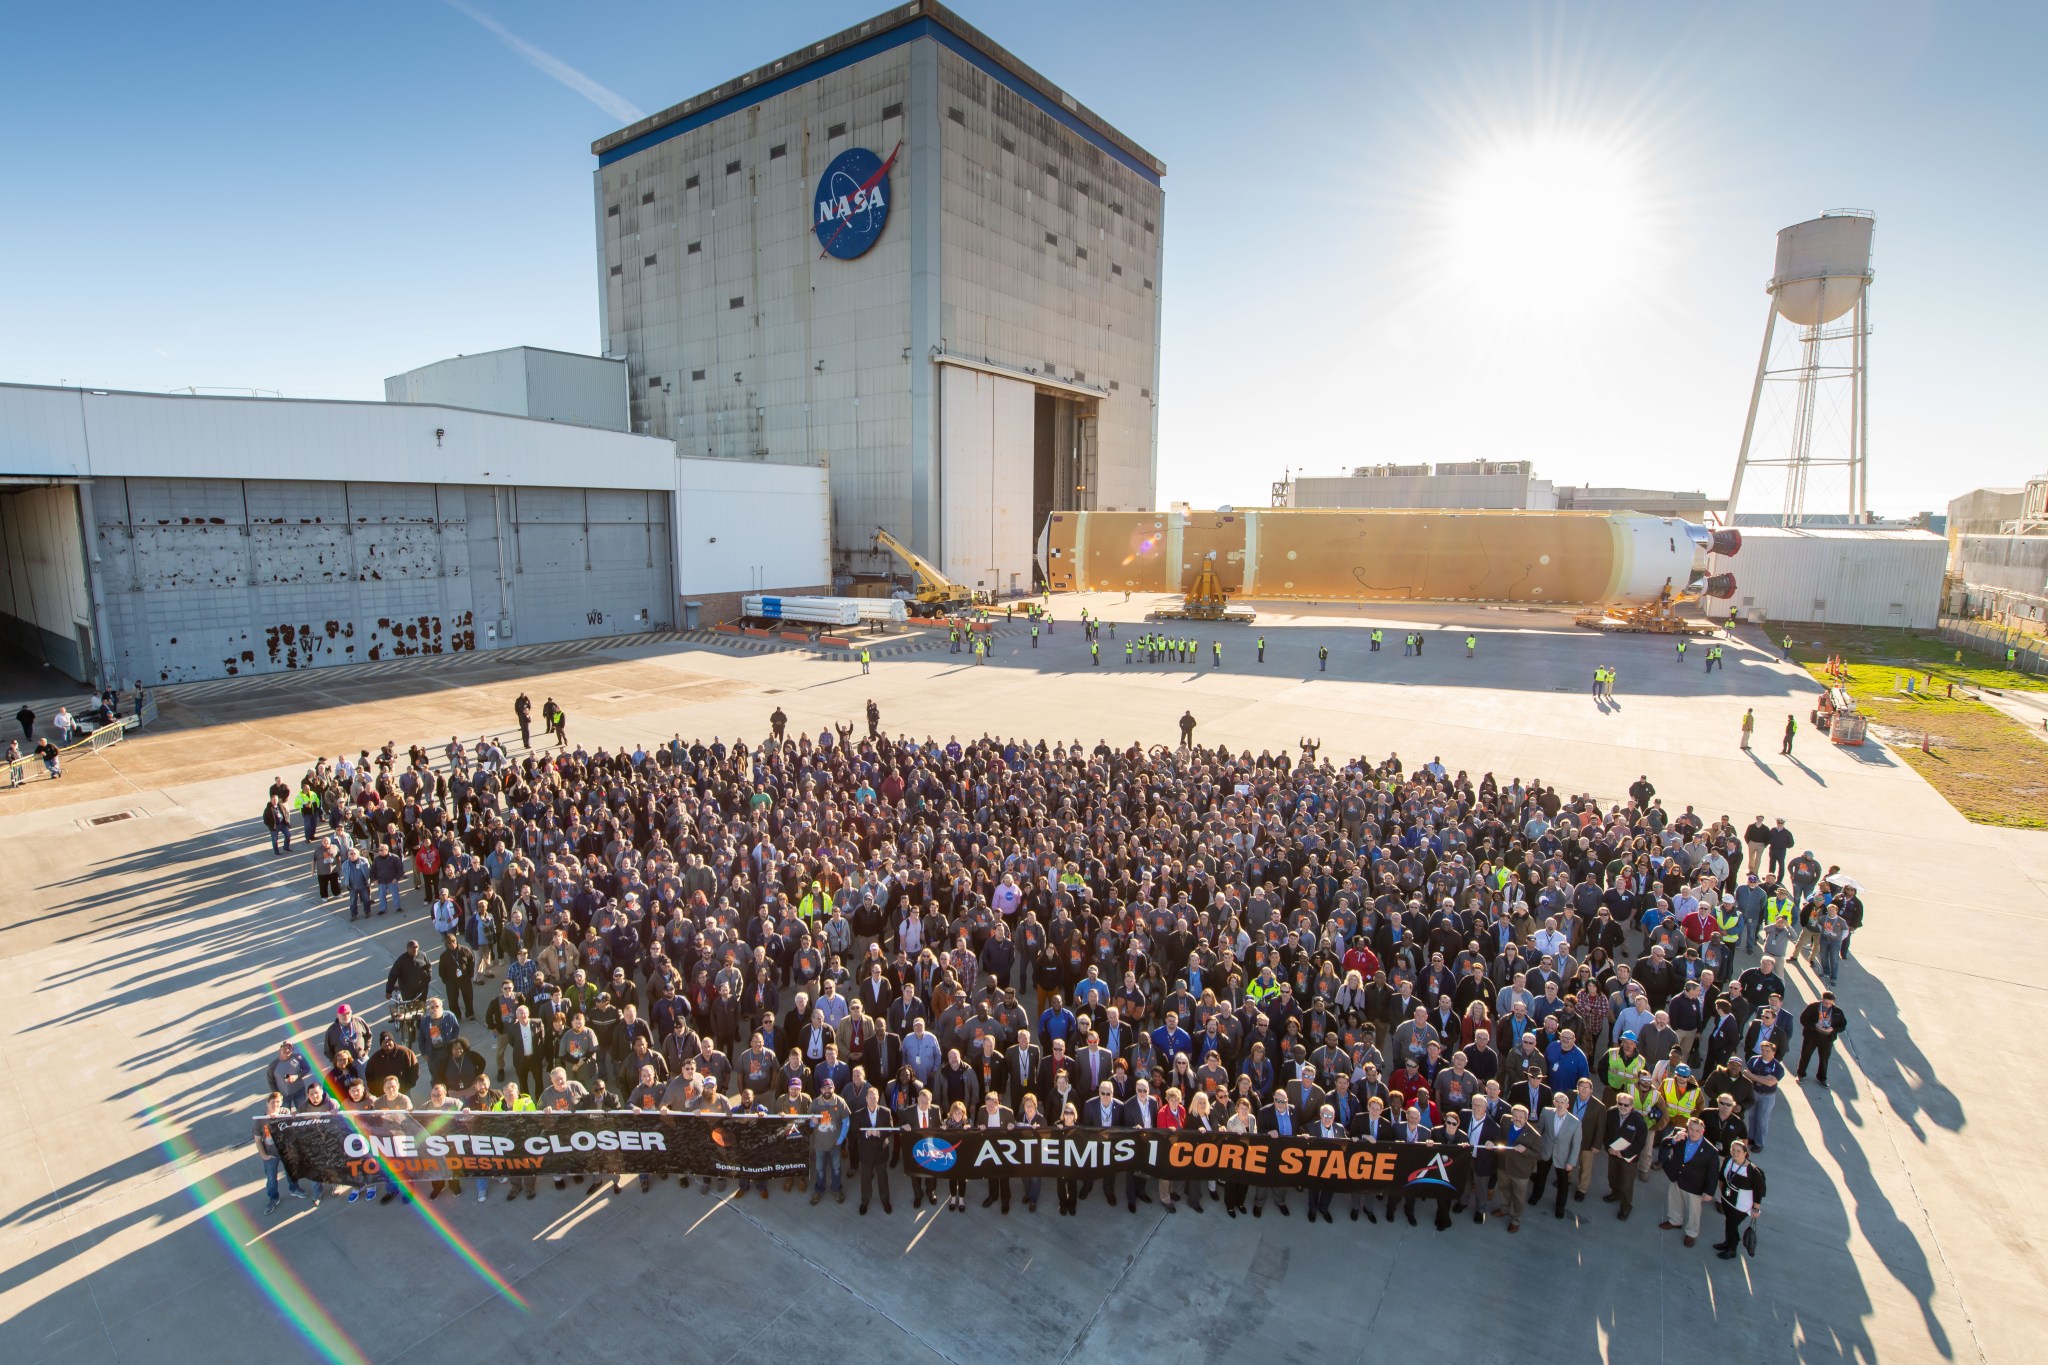 NASA personnel in front of the fully assembled core stage for NASA’s Space Launch System rocket